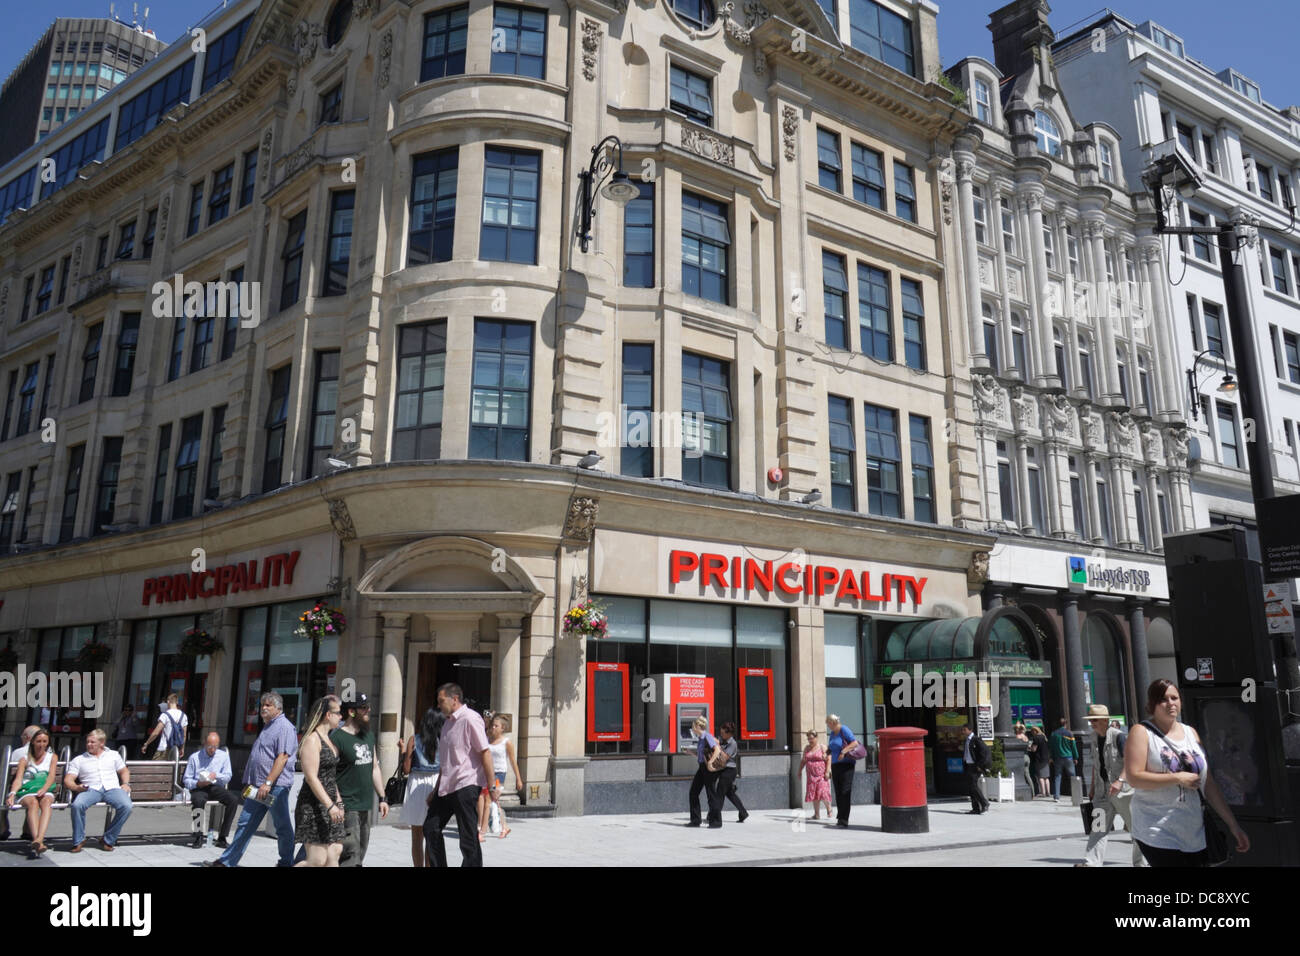 The Principality Building Society Headquarters in Queen Street, Cardiff, Wales UK Streetscene pedestrian street Stock Photo